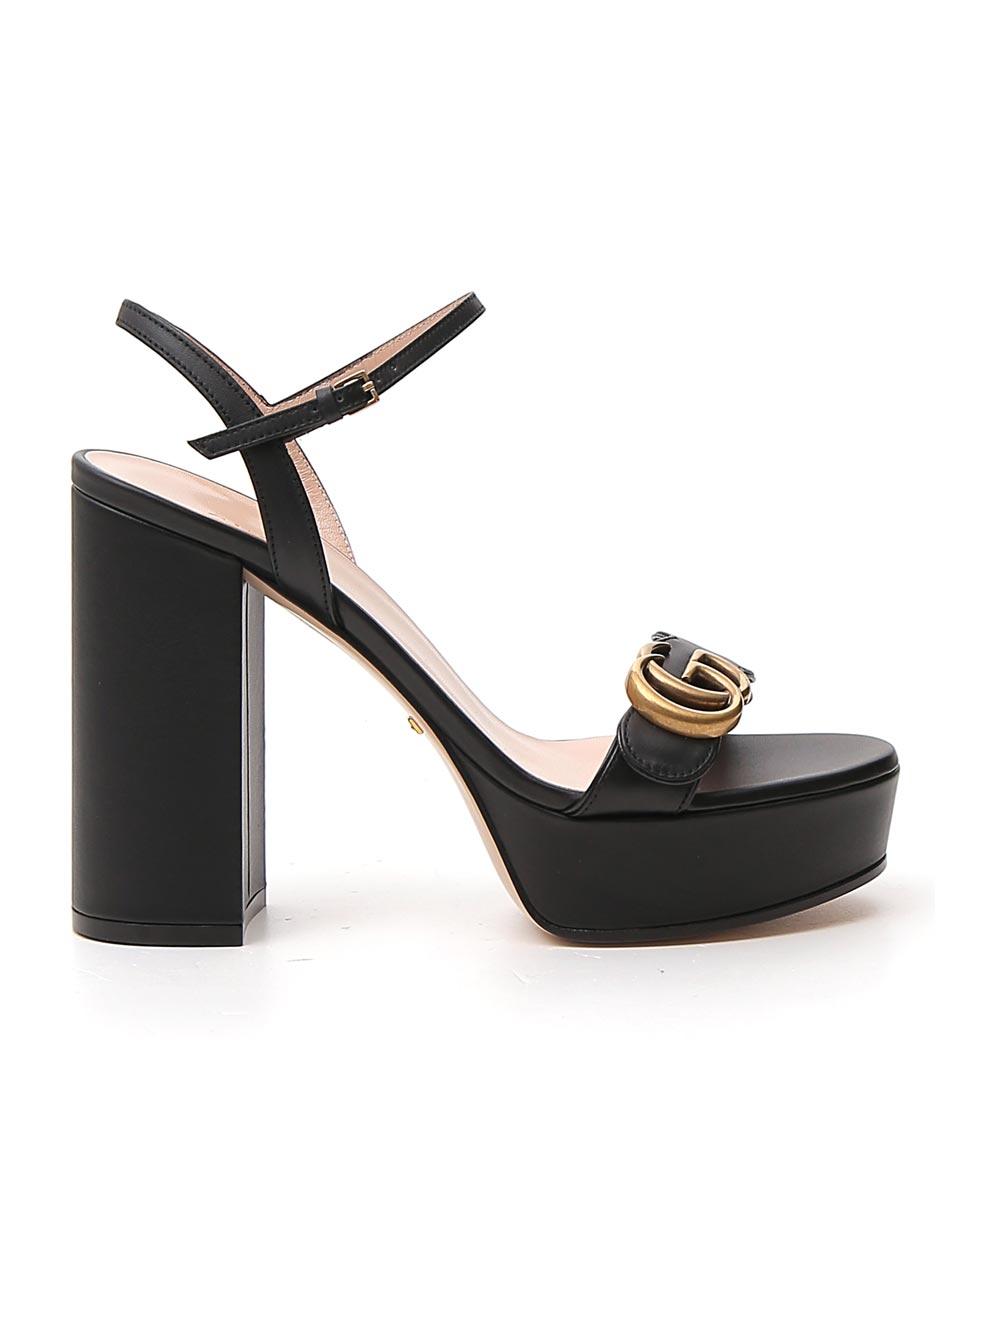 Gucci GG Marmont Leather Platform Sandals in Nero (Black) - Save 12% - Lyst